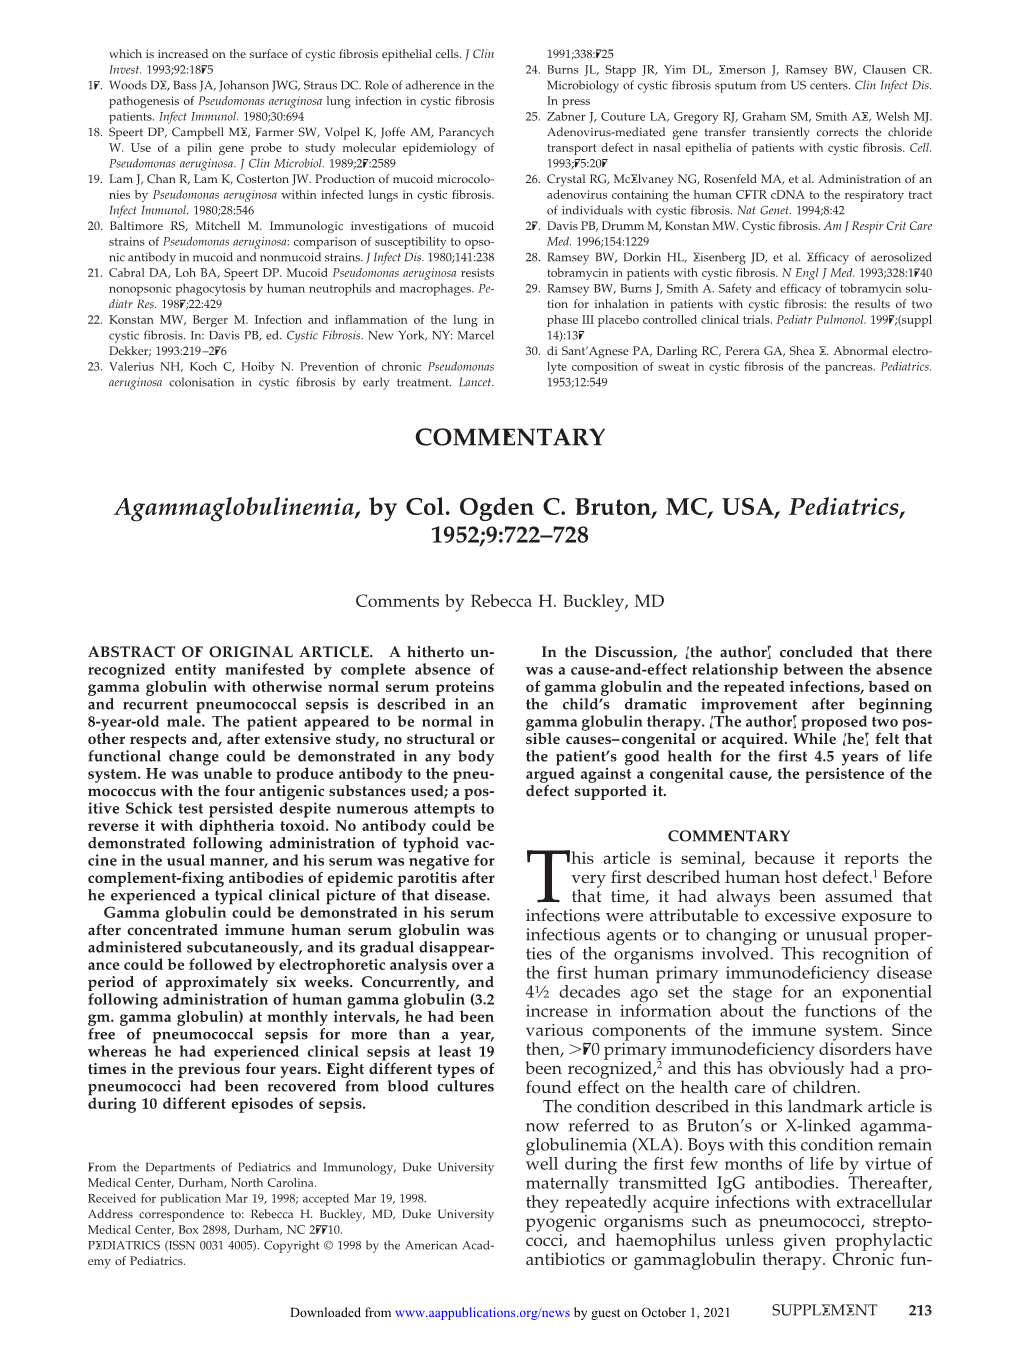 COMMENTARY Agammaglobulinemia, by Col